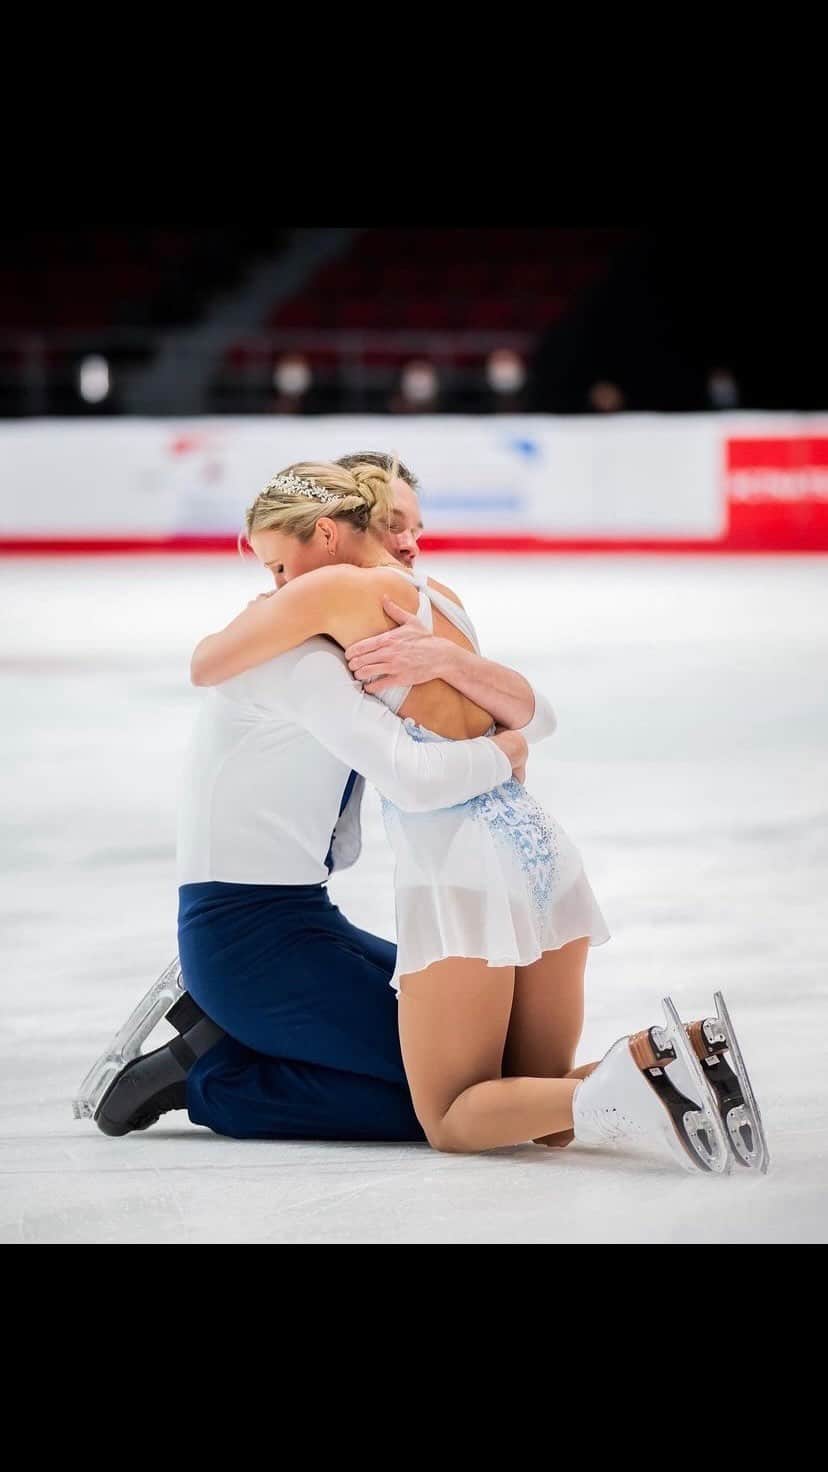 カーステン・ムーア＝タワーズのインスタグラム：「I’d like to take this opportunity to announce my retirement from competitive skating 🤍 I am filled with gratitude for having represented Canada internationally for 13 years. My career was filled with extreme highs and some tumultuous lows and it certainly wasn’t perfect; nor was I.  I hope to be remembered as a good teammate; as somebody who won with class and lost with dignity. Most of all, I hope you remember me as a fighter; for my performances, for my people, for what’s right. Even if it got me into trouble a time or two 😜  My eternal thanks go to my family; their constant support and sacrifice allowed me to live my dreams. To Beckey, for being the best friend there ever was; who felt every high and low with me. To Liam, for putting in all of the heavy lifting for the last four years; for always being able to make me laugh.  Thank you to our support staff for keeping us together physically and mentally. To Pat Magee, especially, for working so hard for us from anywhere in the world. To Jodie and Alexia, for reminding me what I deserve. To Skate Oakville, for the amazing support.  I am so grateful for my past coaches and partners. Thanks, Dylan Moscovitch for carrying me, literally, through the first half of my career. To Julie Marcotte, who is responsible for much of our growth as people and skaters. Our creation process will forever be some of my favourite memories. Mark Pillay was my first and last pair choreographer and a fantastic mentor.  There are not enough words to express my love, respect, and admiration for the coaching team that saw us through to the end. Thank you, Brian Shales for some of our most fun lessons. Most of all, to Bruno Marcotte and Alison Purkiss, for seeing me at my lowest and believing in me anyways; for caring about us as humans first, and athletes second. My career has been more enjoyable and worthwhile with them as coaches and mentors. Finally, it has been the honour of my life to skate with Mike; thank you for all that you are. I have no regrets, and will cherish the memories forever.  Thank you, fans and friends, for your support all these years. I’ll see you in the stands as I assume my new role as everybody’s #1 fan 🥰」